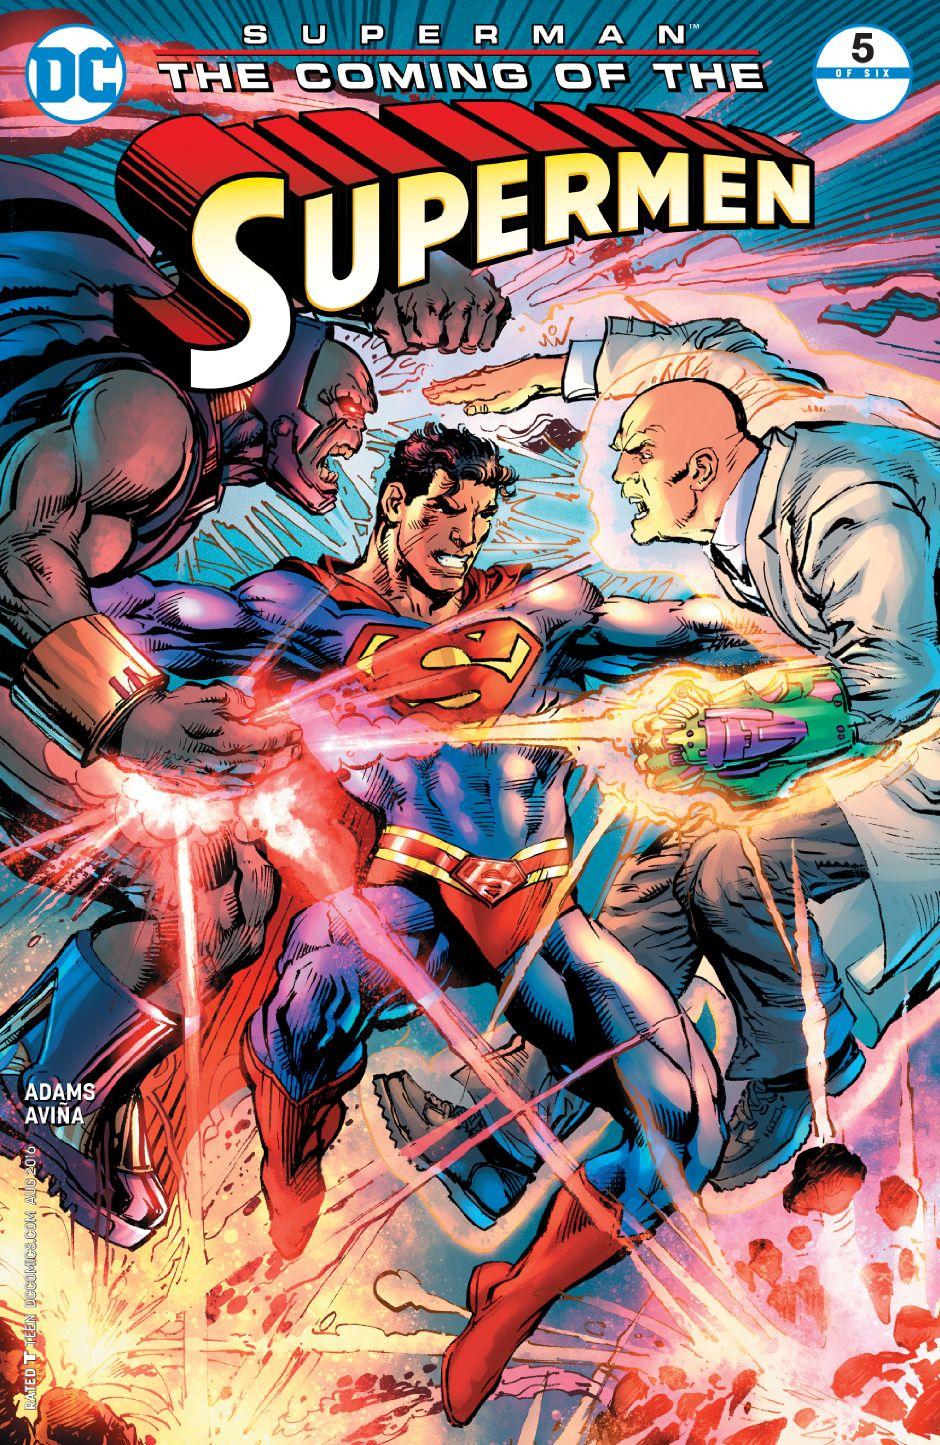 Superman: The Coming of the Supermen Vol. 1 #5